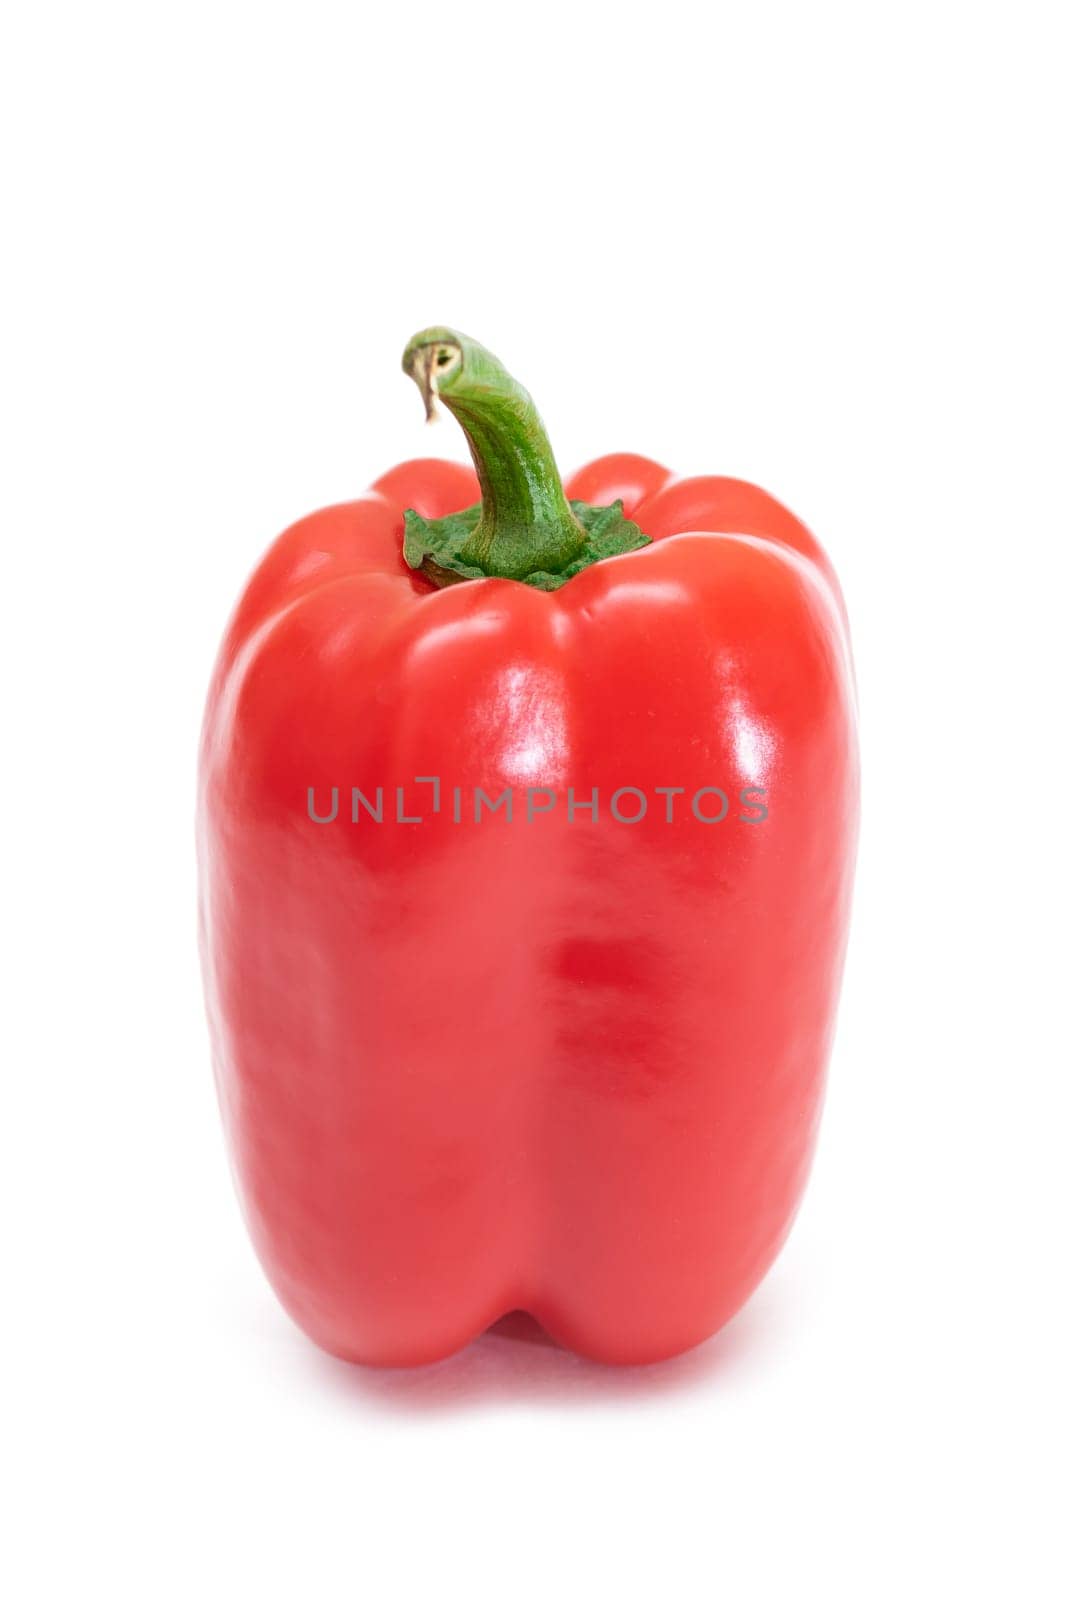 Red Sweet Bell Pepper Isolated on White Background